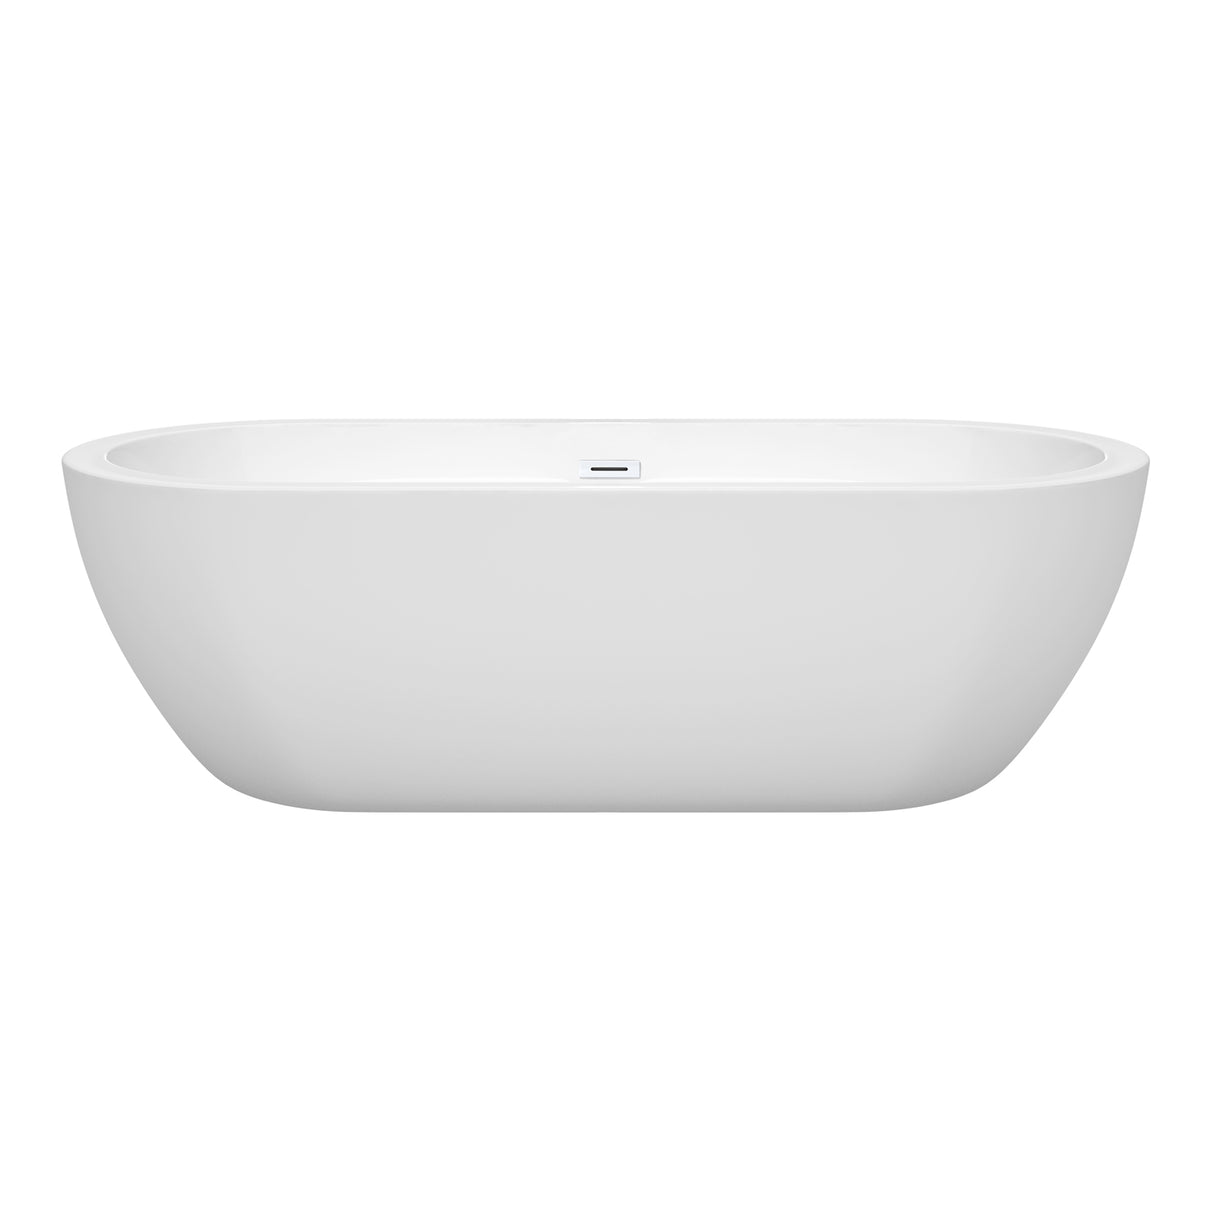 Soho 72 Inch Freestanding Bathtub in White with Shiny White Drain and Overflow Trim